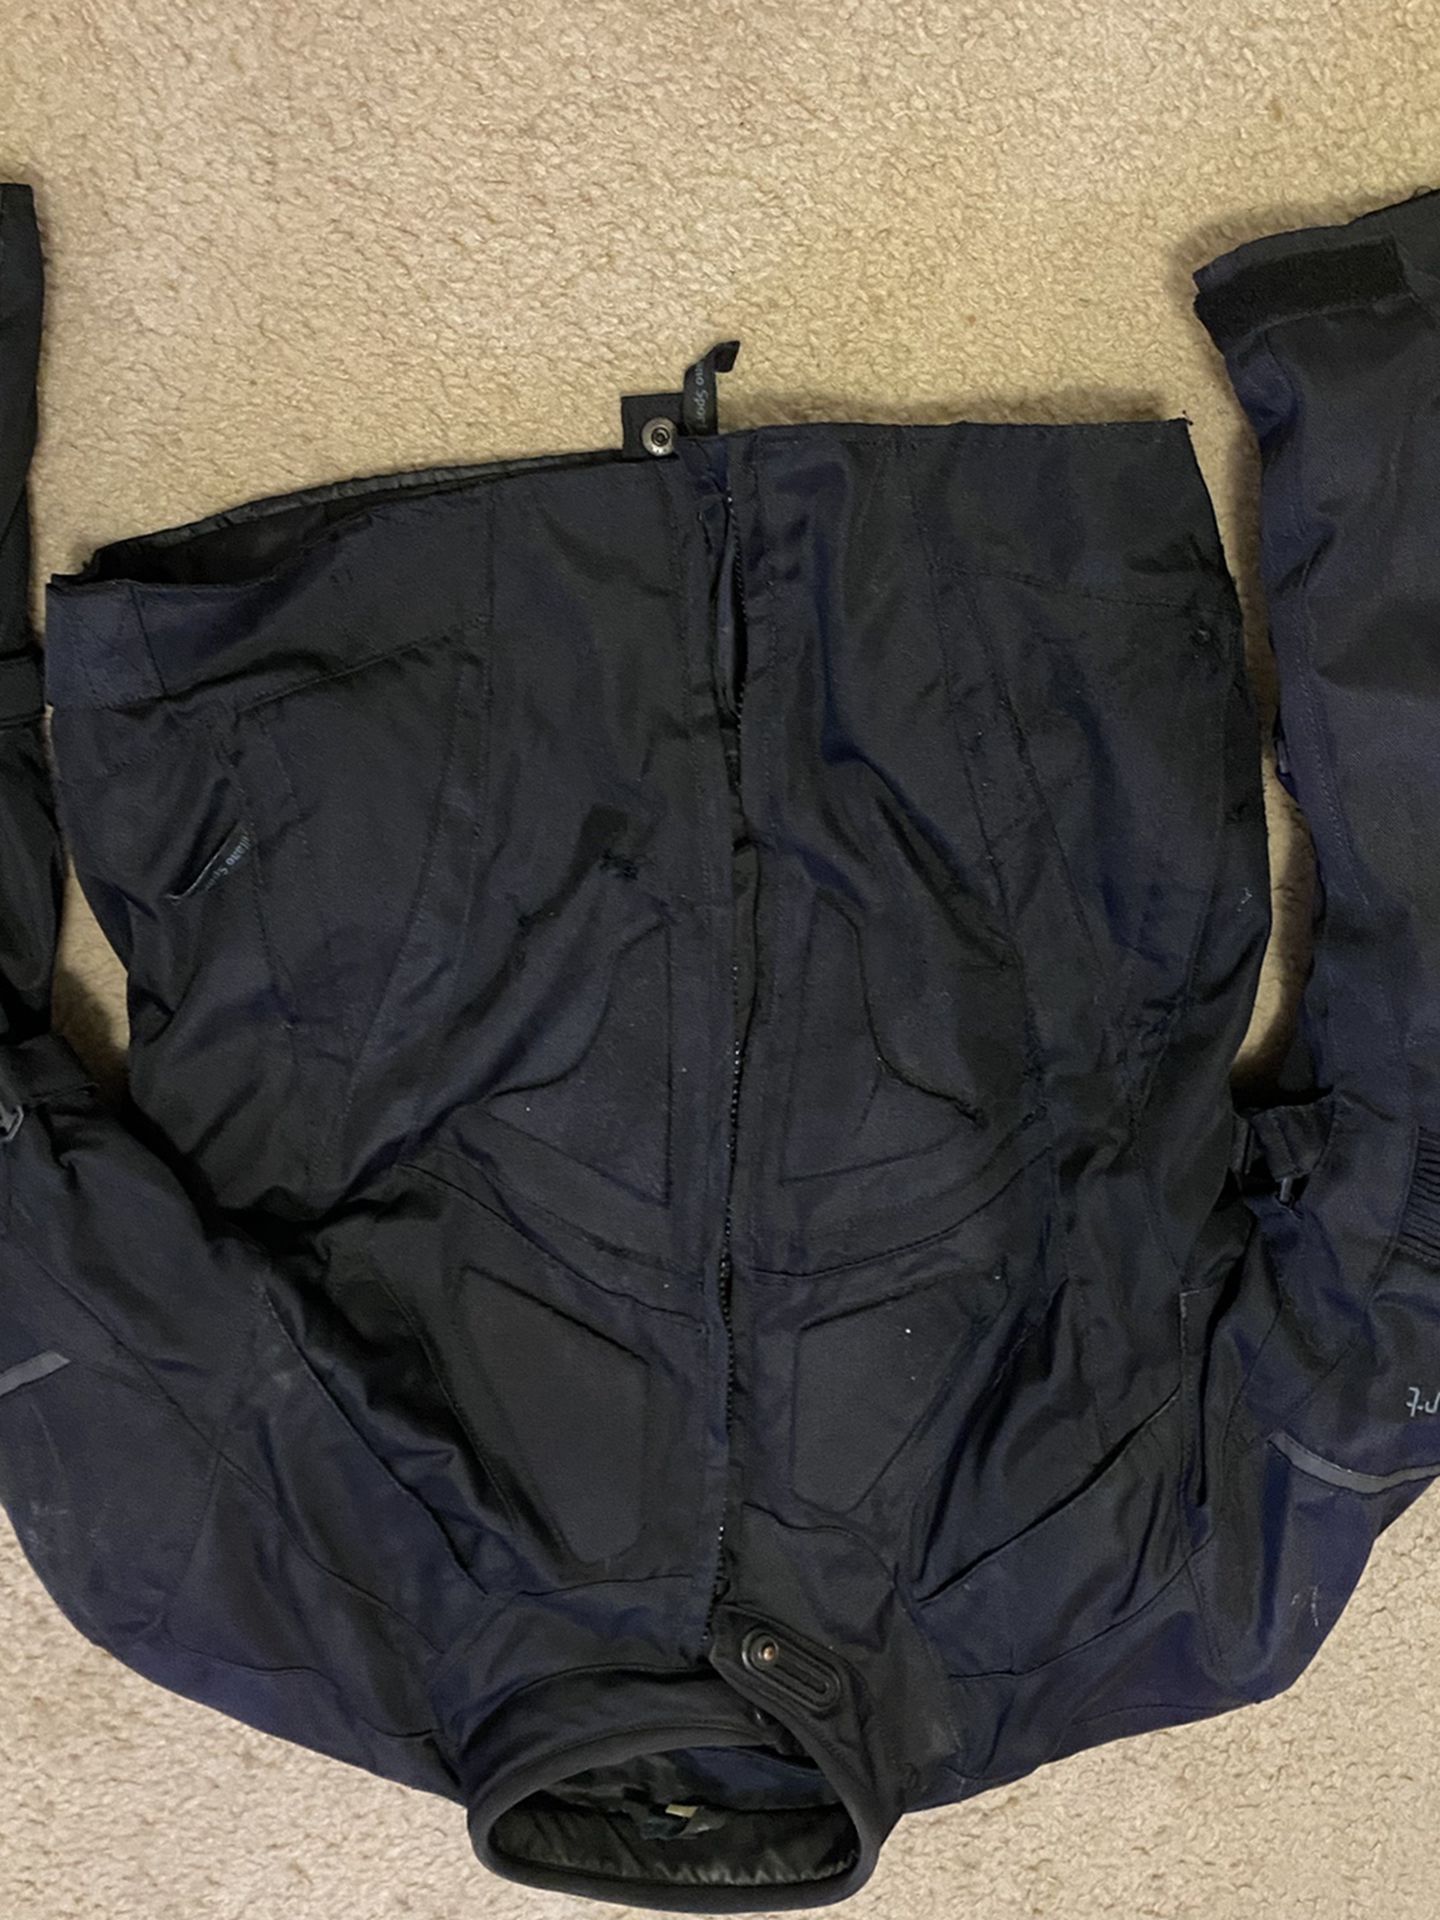 Motorcycle Gear Jacket Pants And Boots - Used - Fair Condition